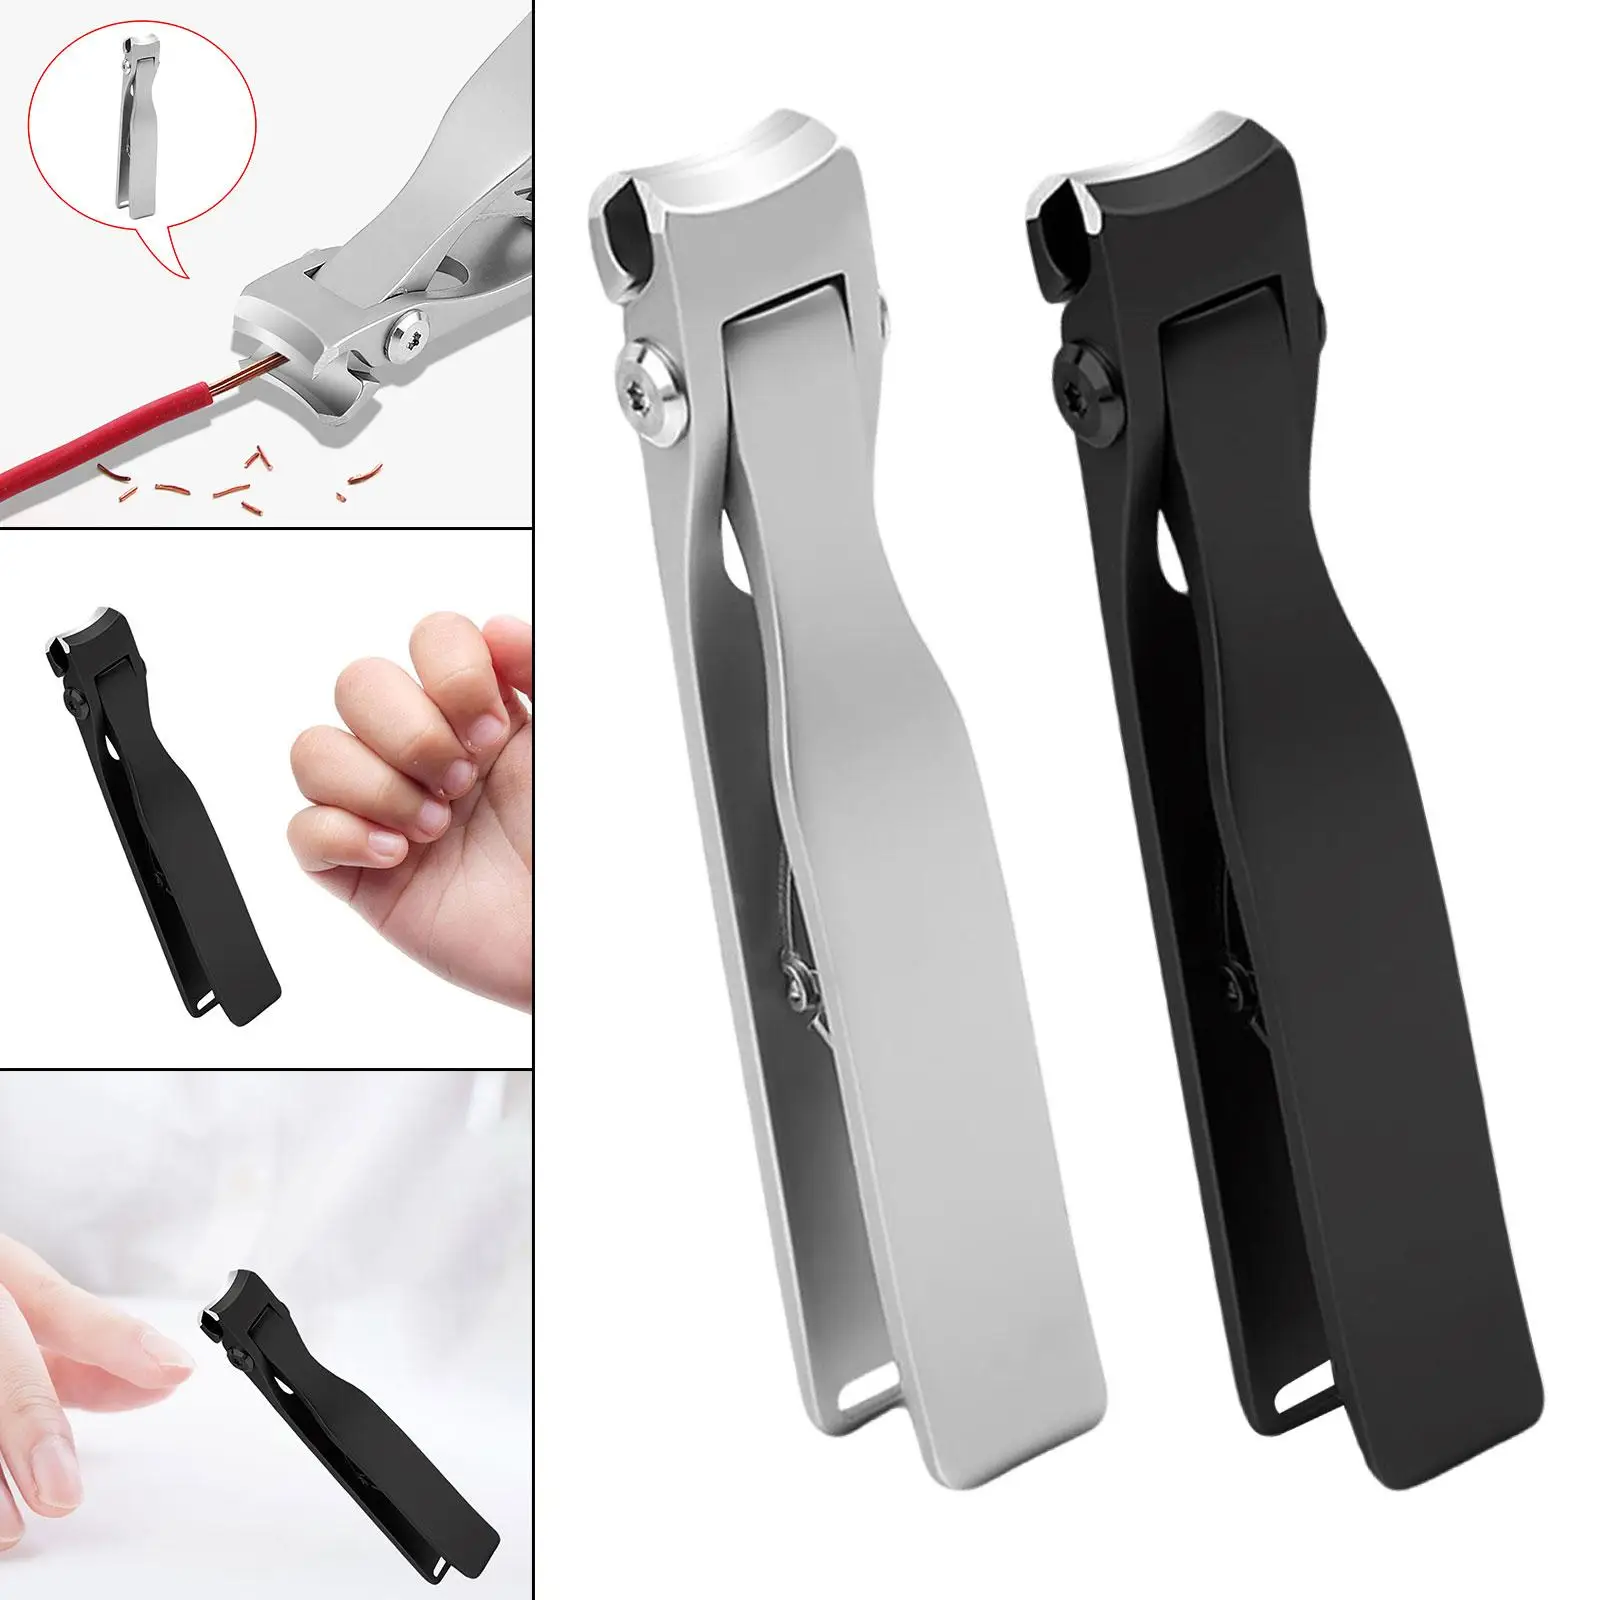 Toe Nail Clippers Nail Trimmer Premium Wide Opening Anti Slip Comfort Grip Fingernail and Toenail Clipper for Thick Toenails